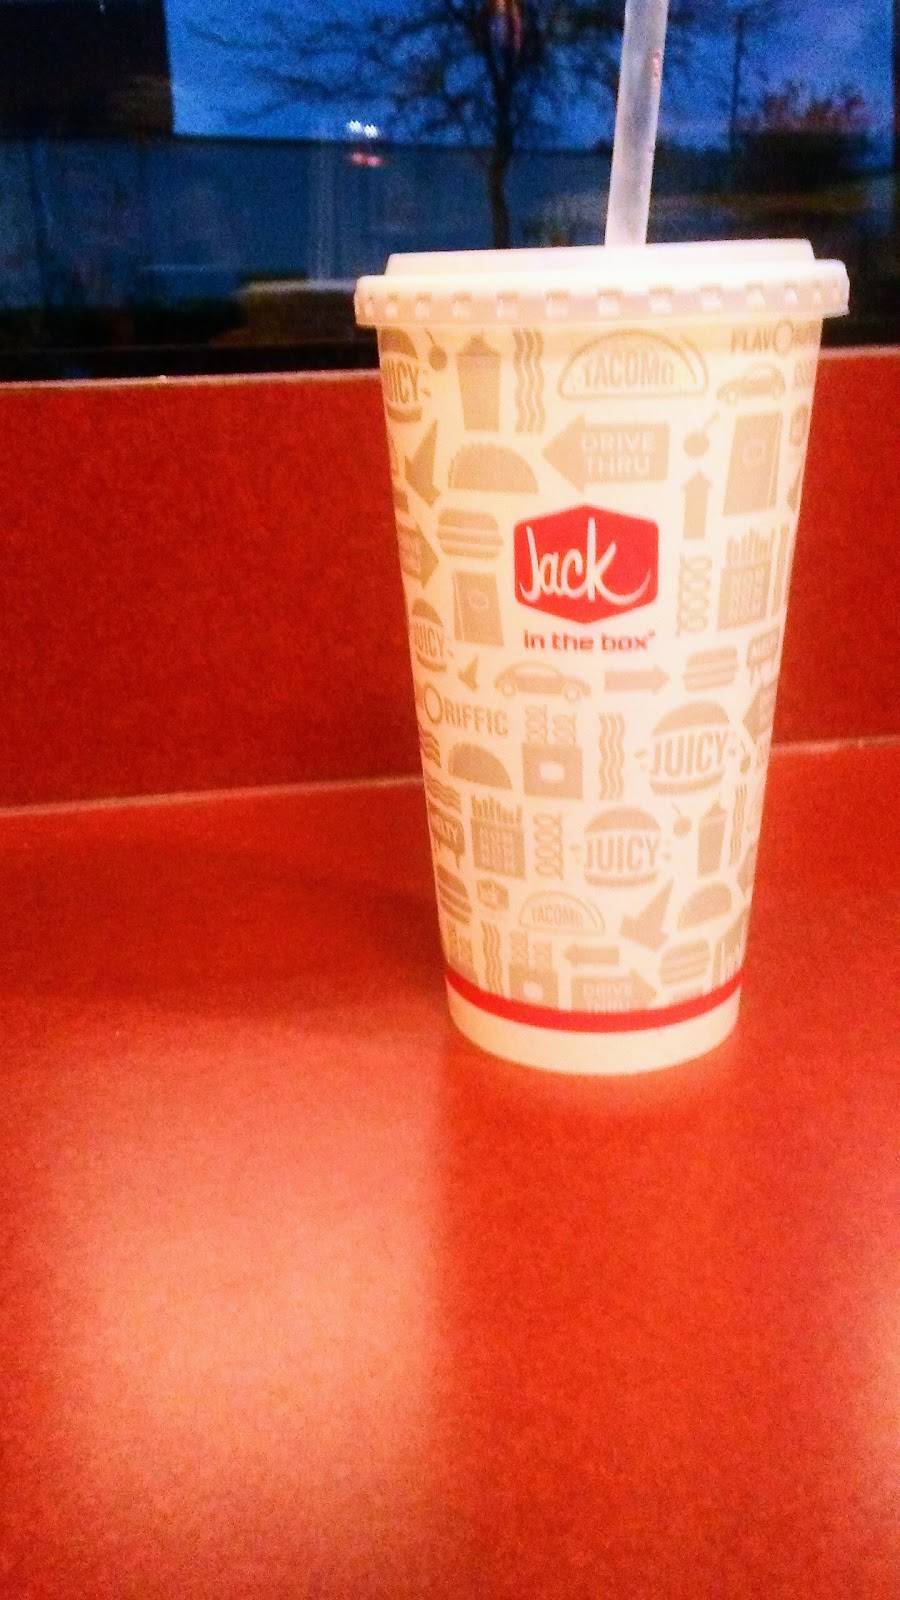 Jack in the Box | restaurant | 1550 I-10, Beaumont, TX 77703, USA | 4098131641 OR +1 409-813-1641